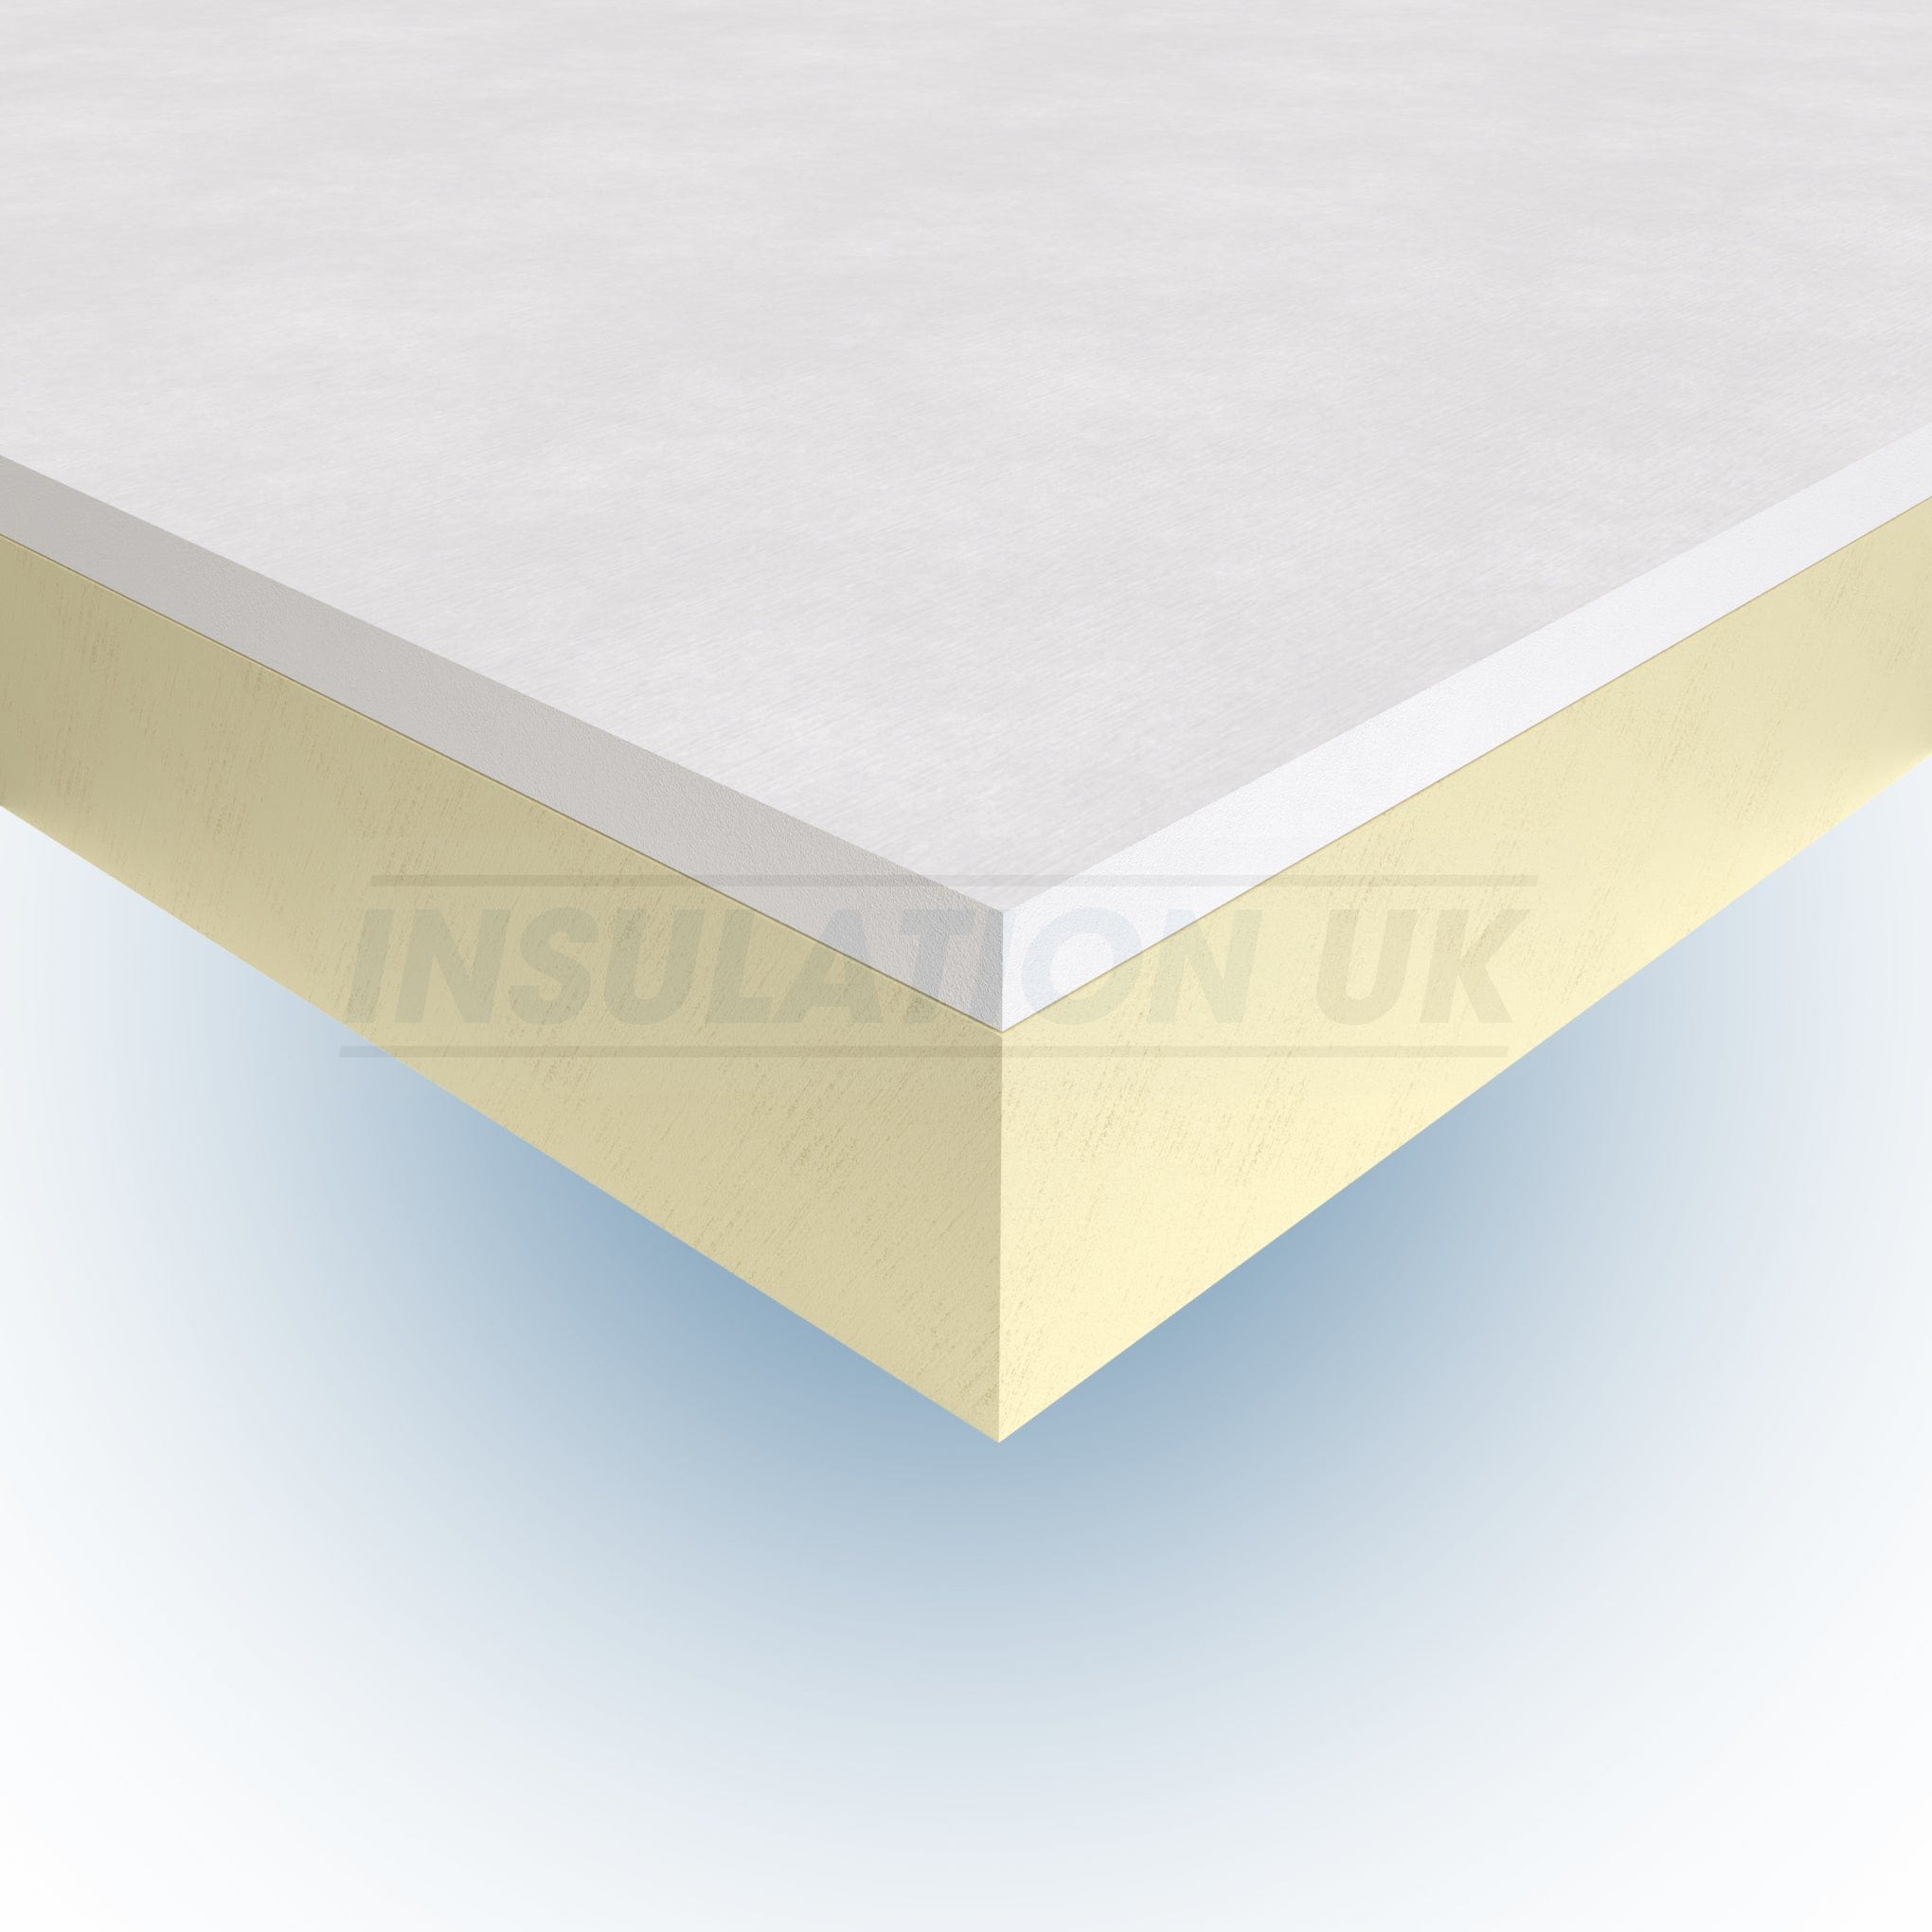 Tekwarm Insulation Tekwarm PIR Pitched Roof Insulation Handy Board | 1200 x 600mm (Pack of 4)